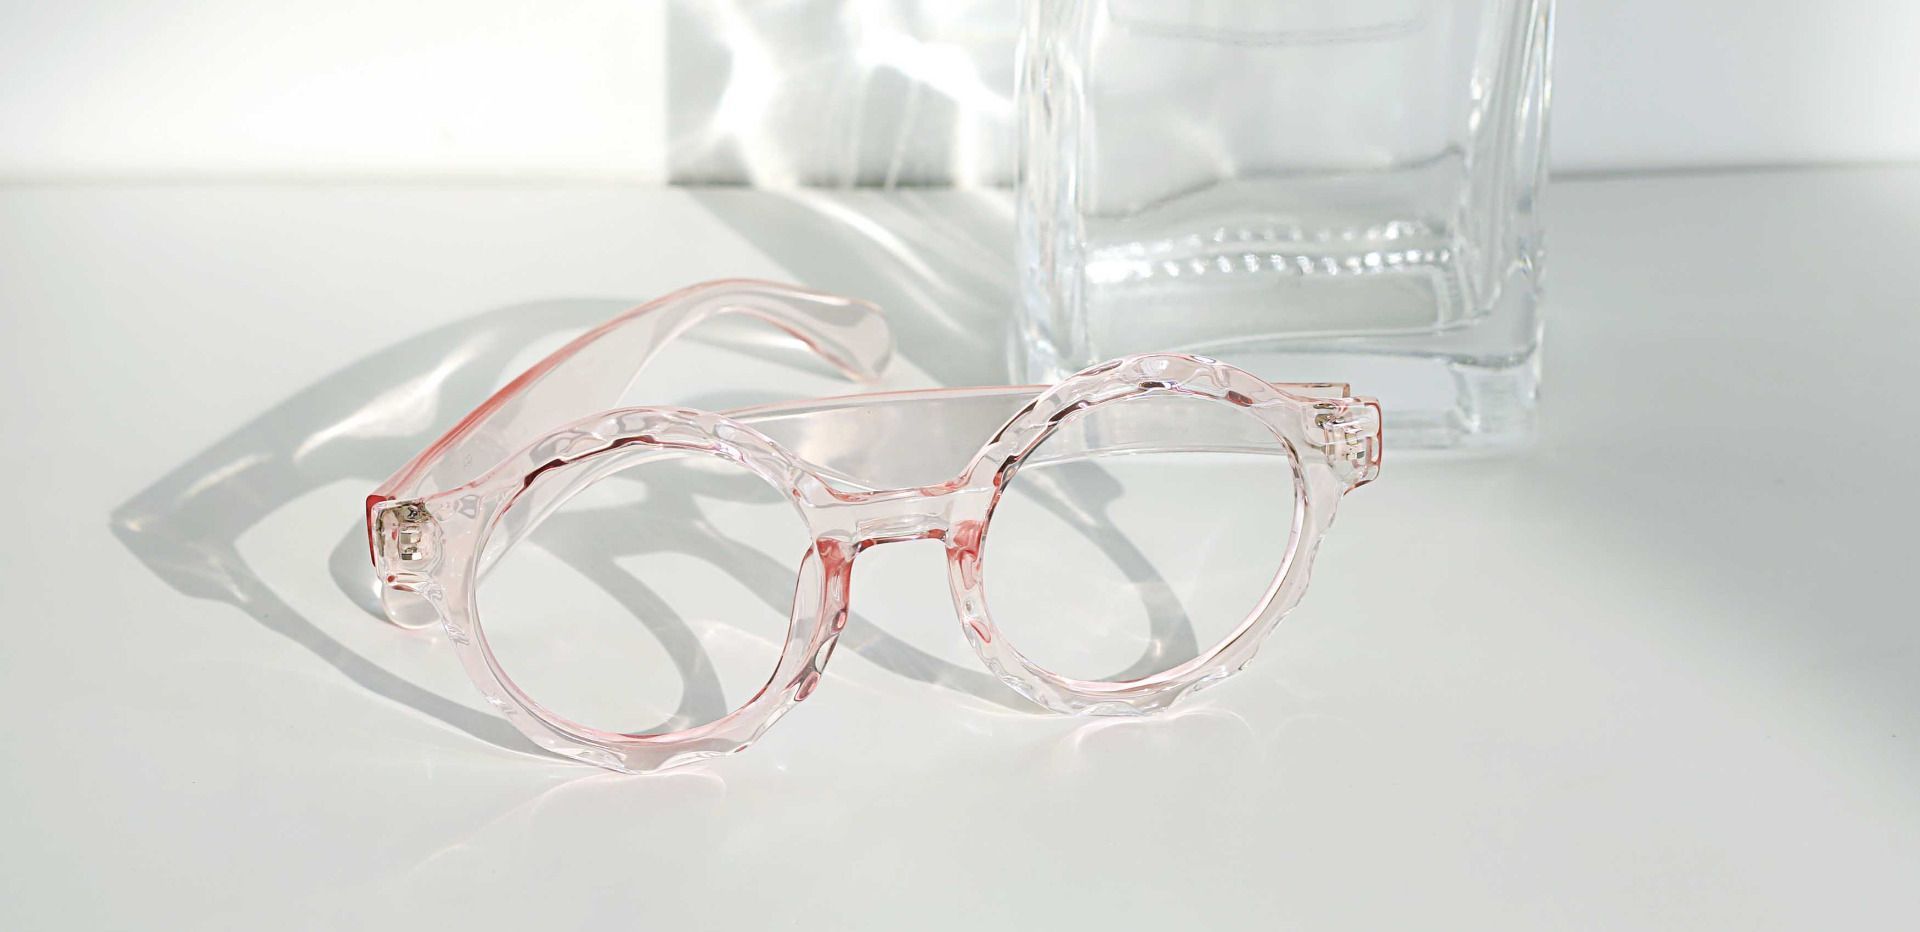 McGuire Round Reading Glasses - Pink